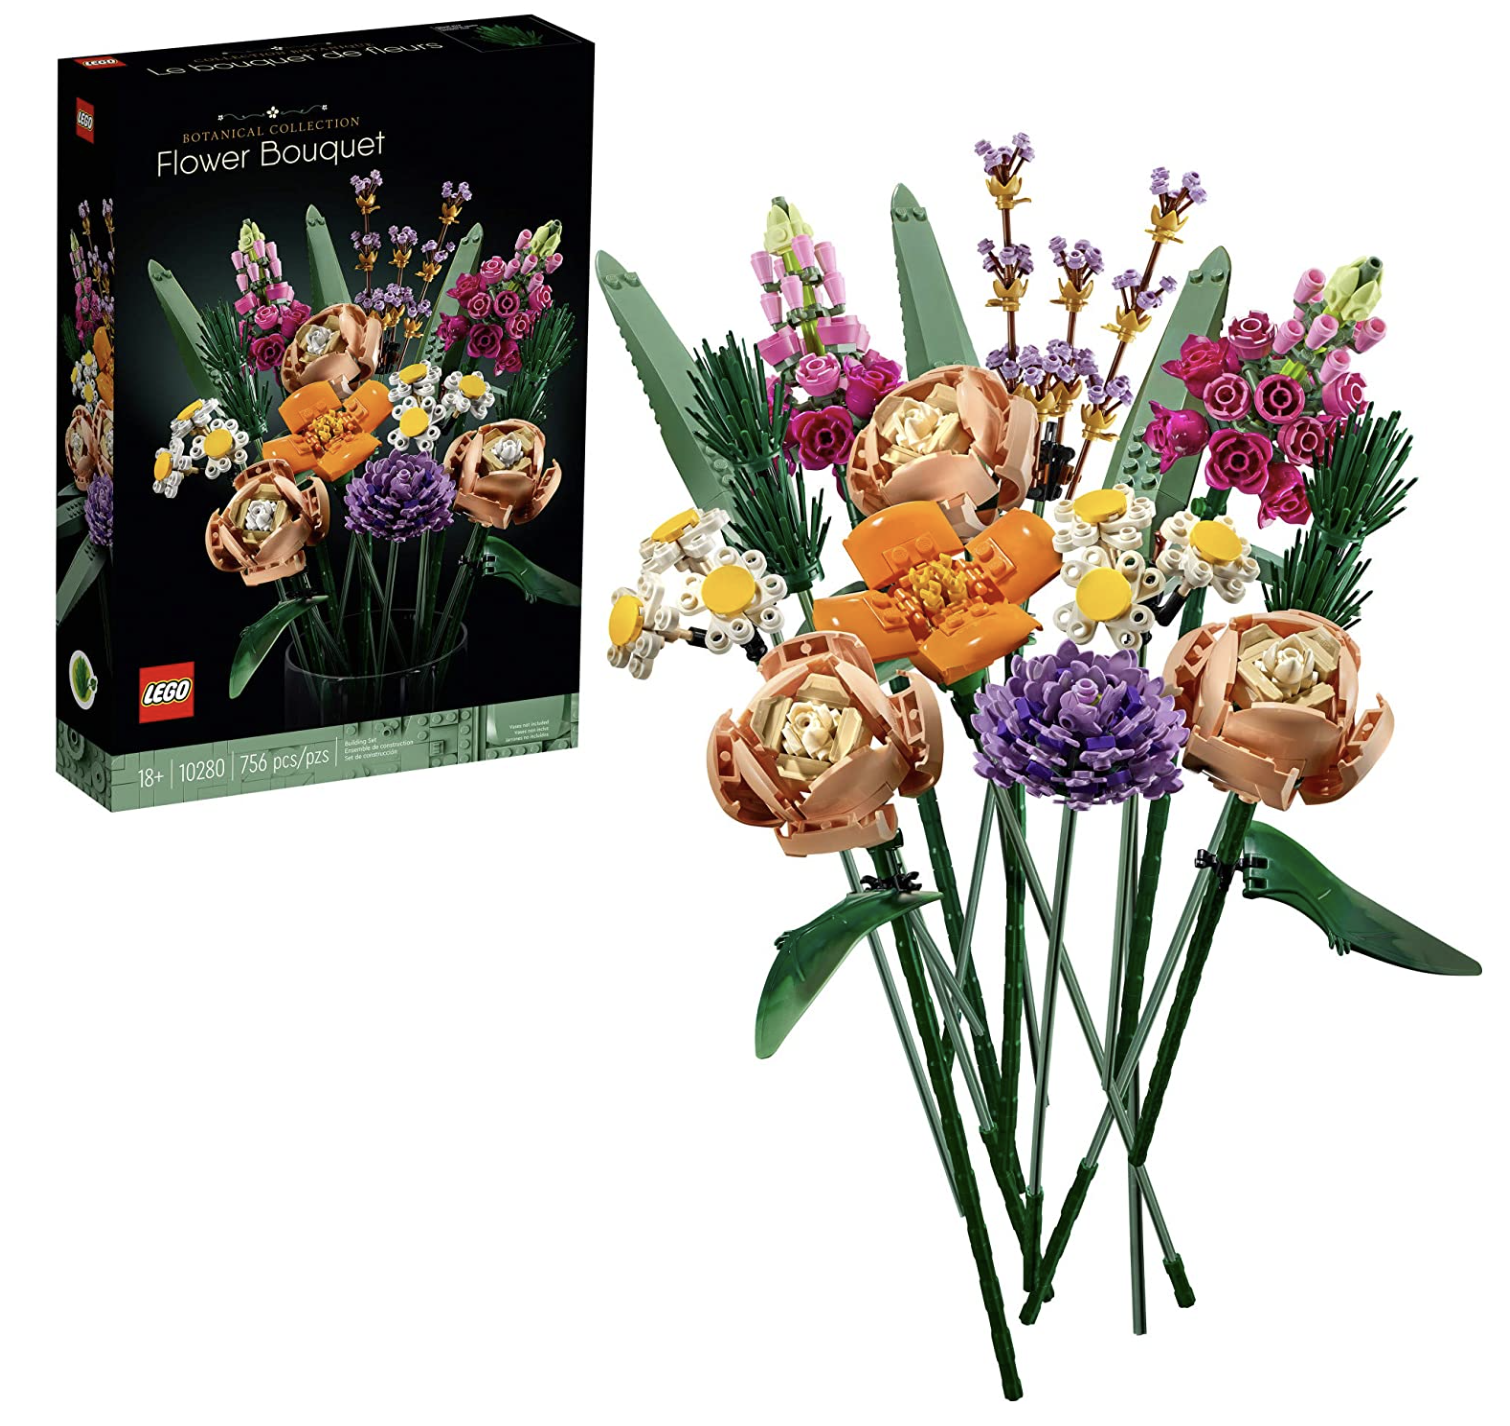 LEGO Flower Bouquet Building Kit only $48.99 shipped! (Reg. $60!)